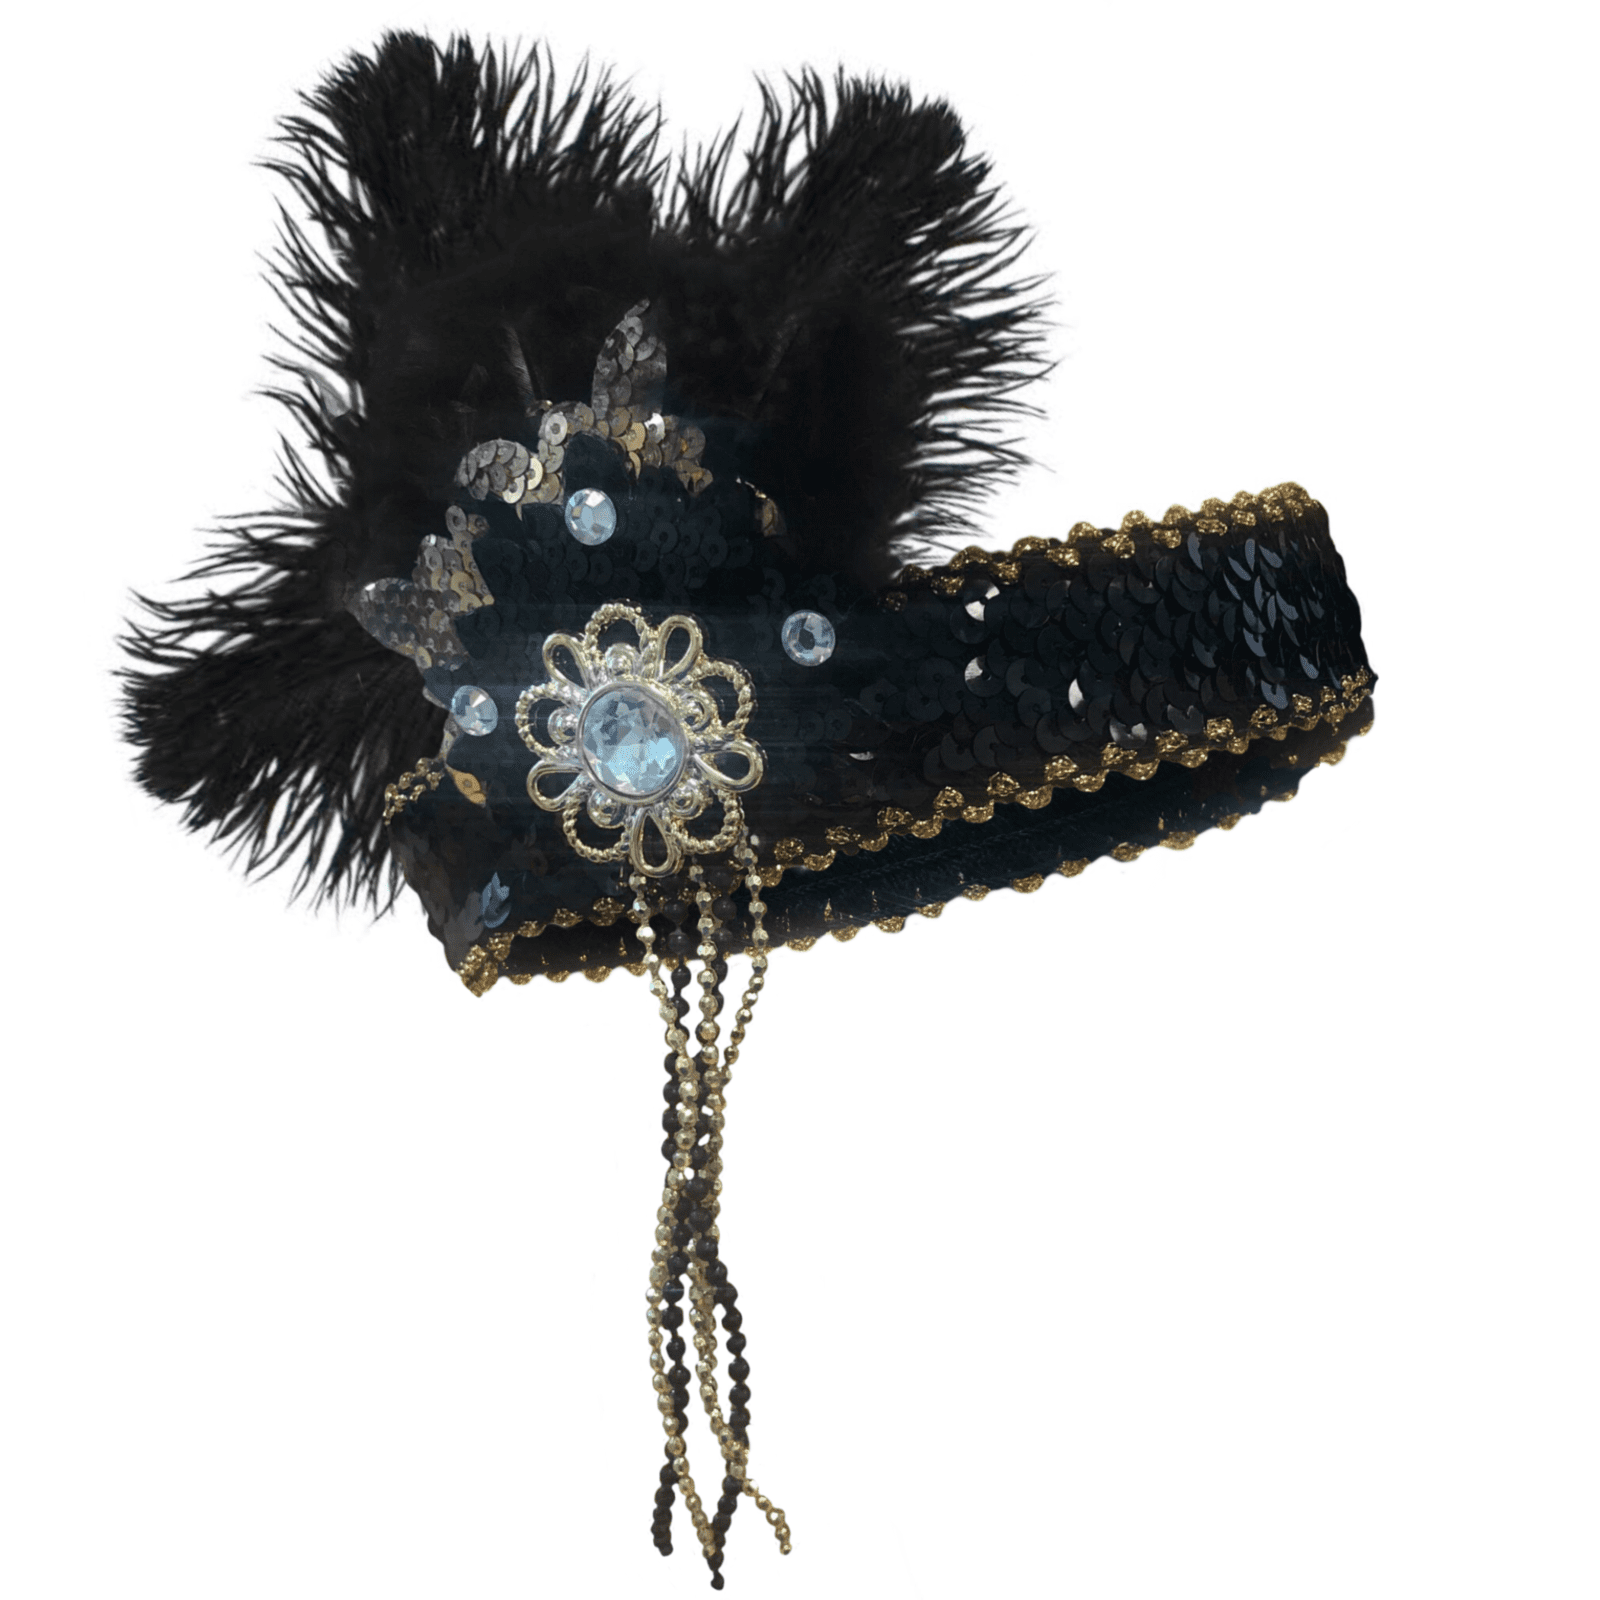 Featured image for “Flapper Headpiece (Deluxe Black/Gold)”